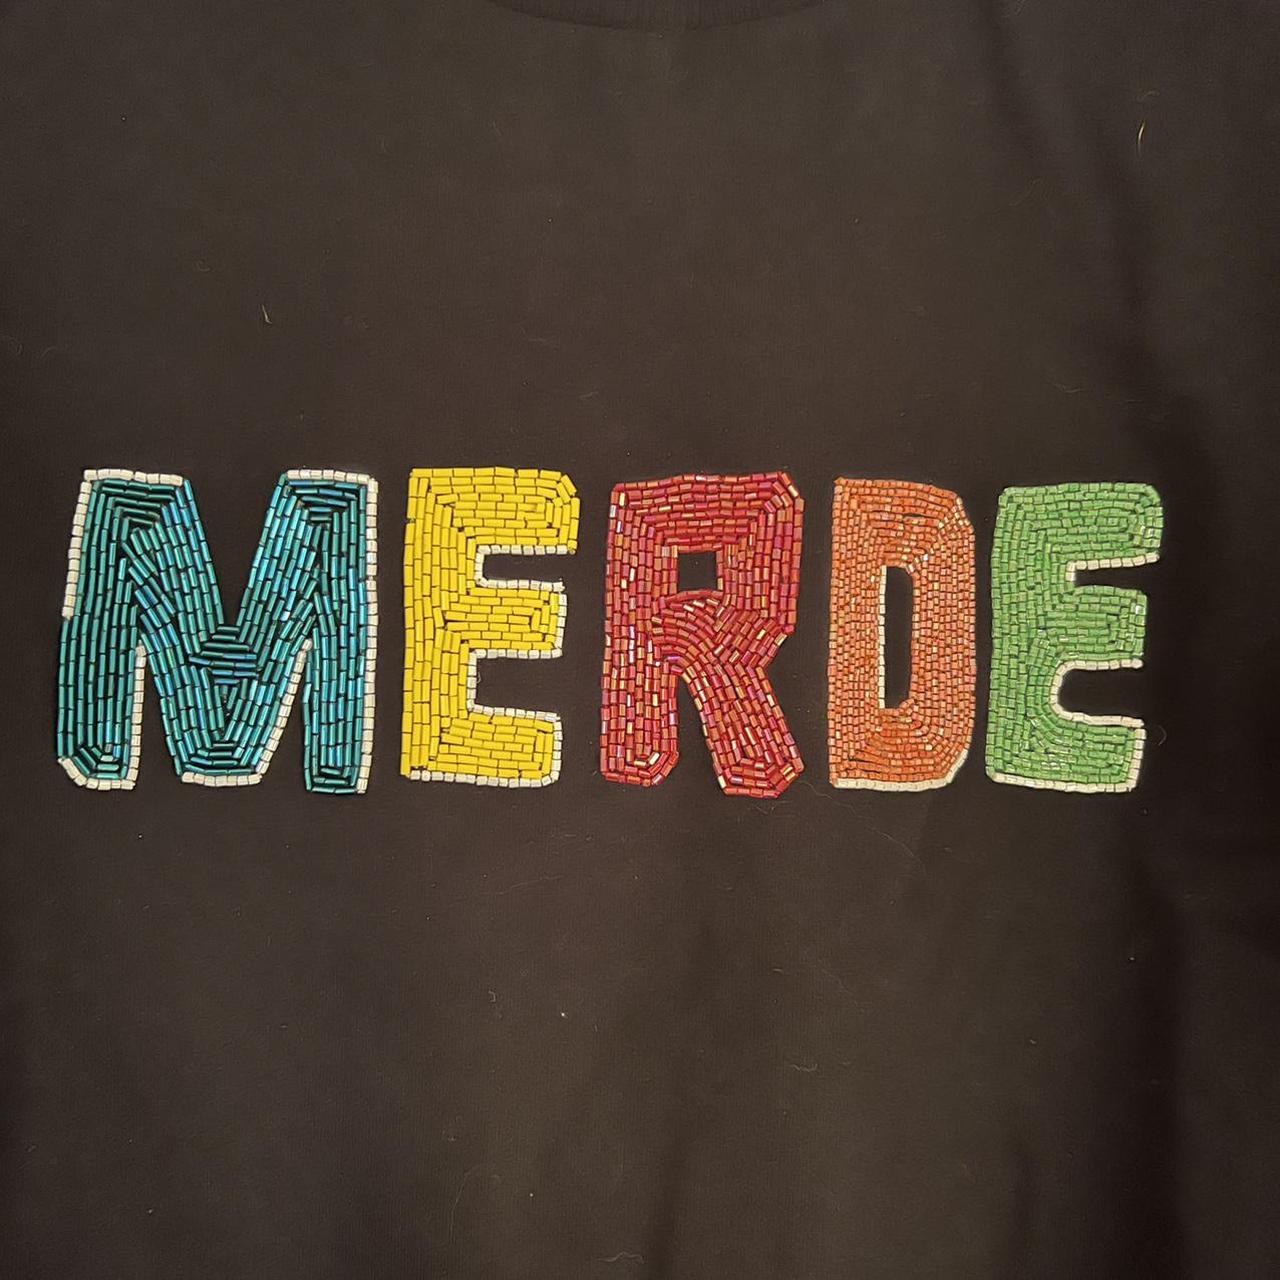 Product Image 2 - WORN ONCE ASHISH “Merde” pullover.